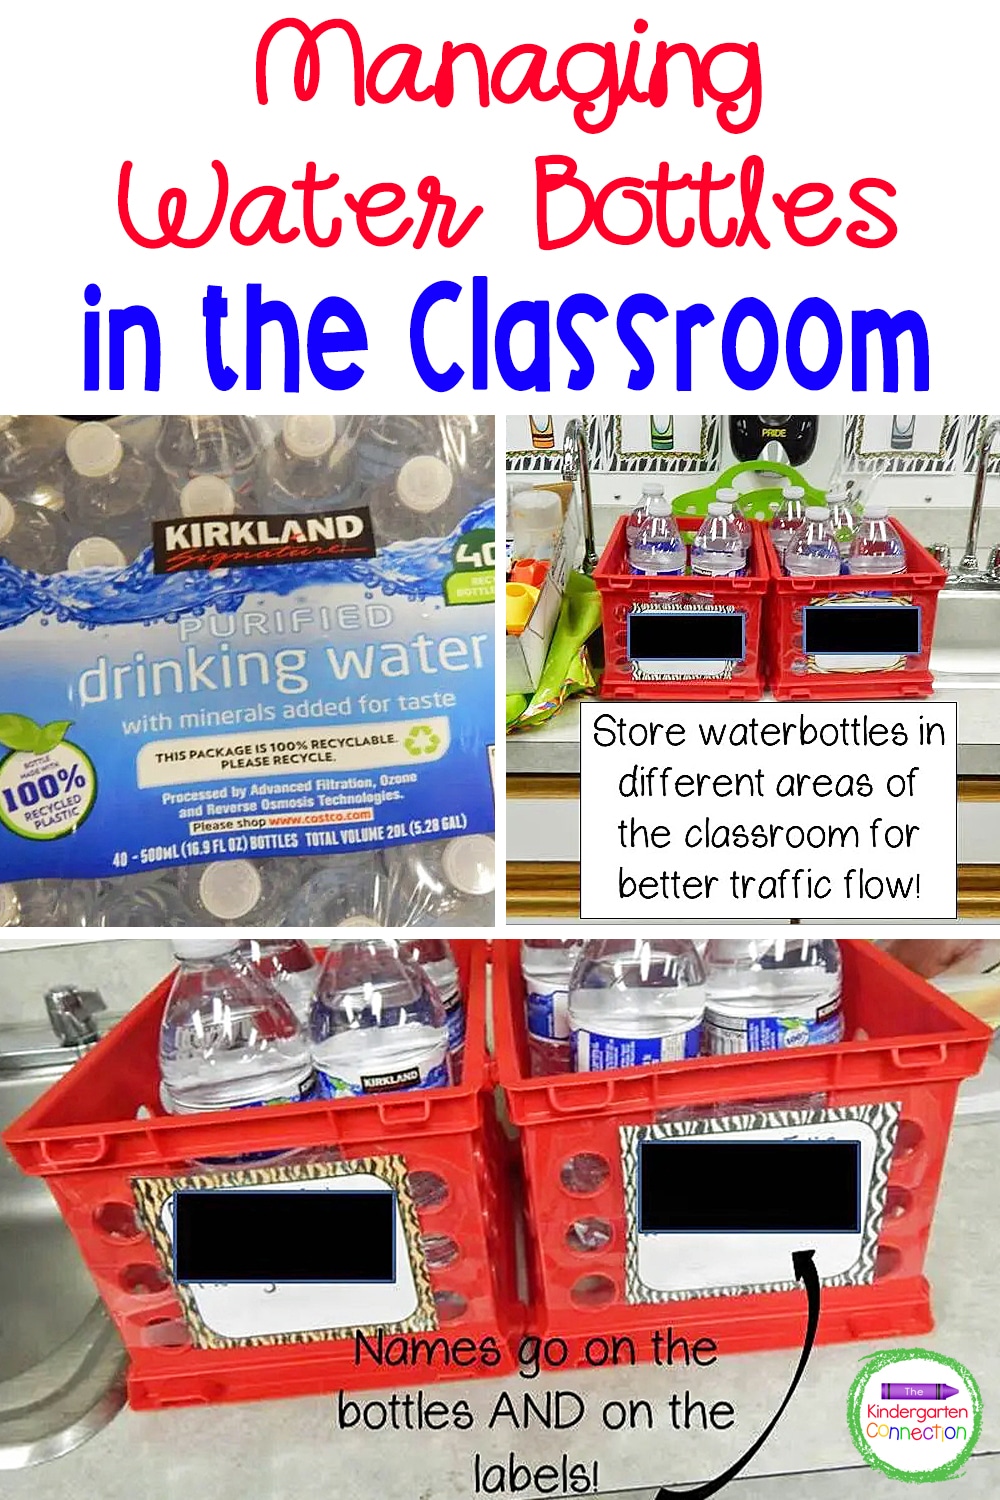 Check out my top tips and tricks for managing water bottles in the classroom and why they work!